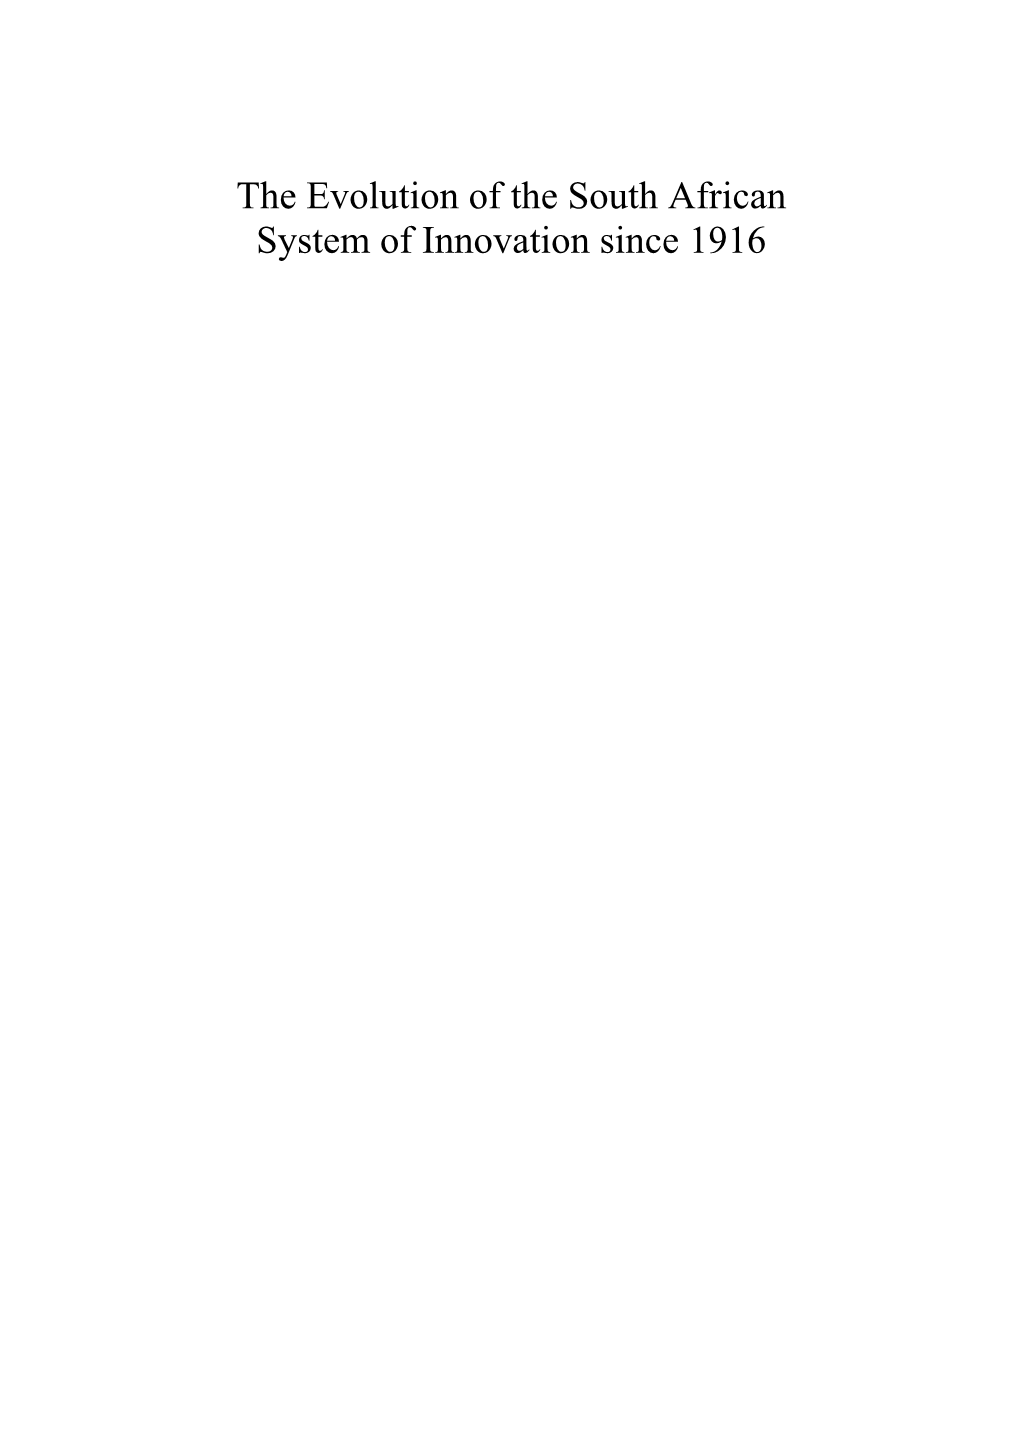 The Evolution of the South African System of Innovation Since 1916